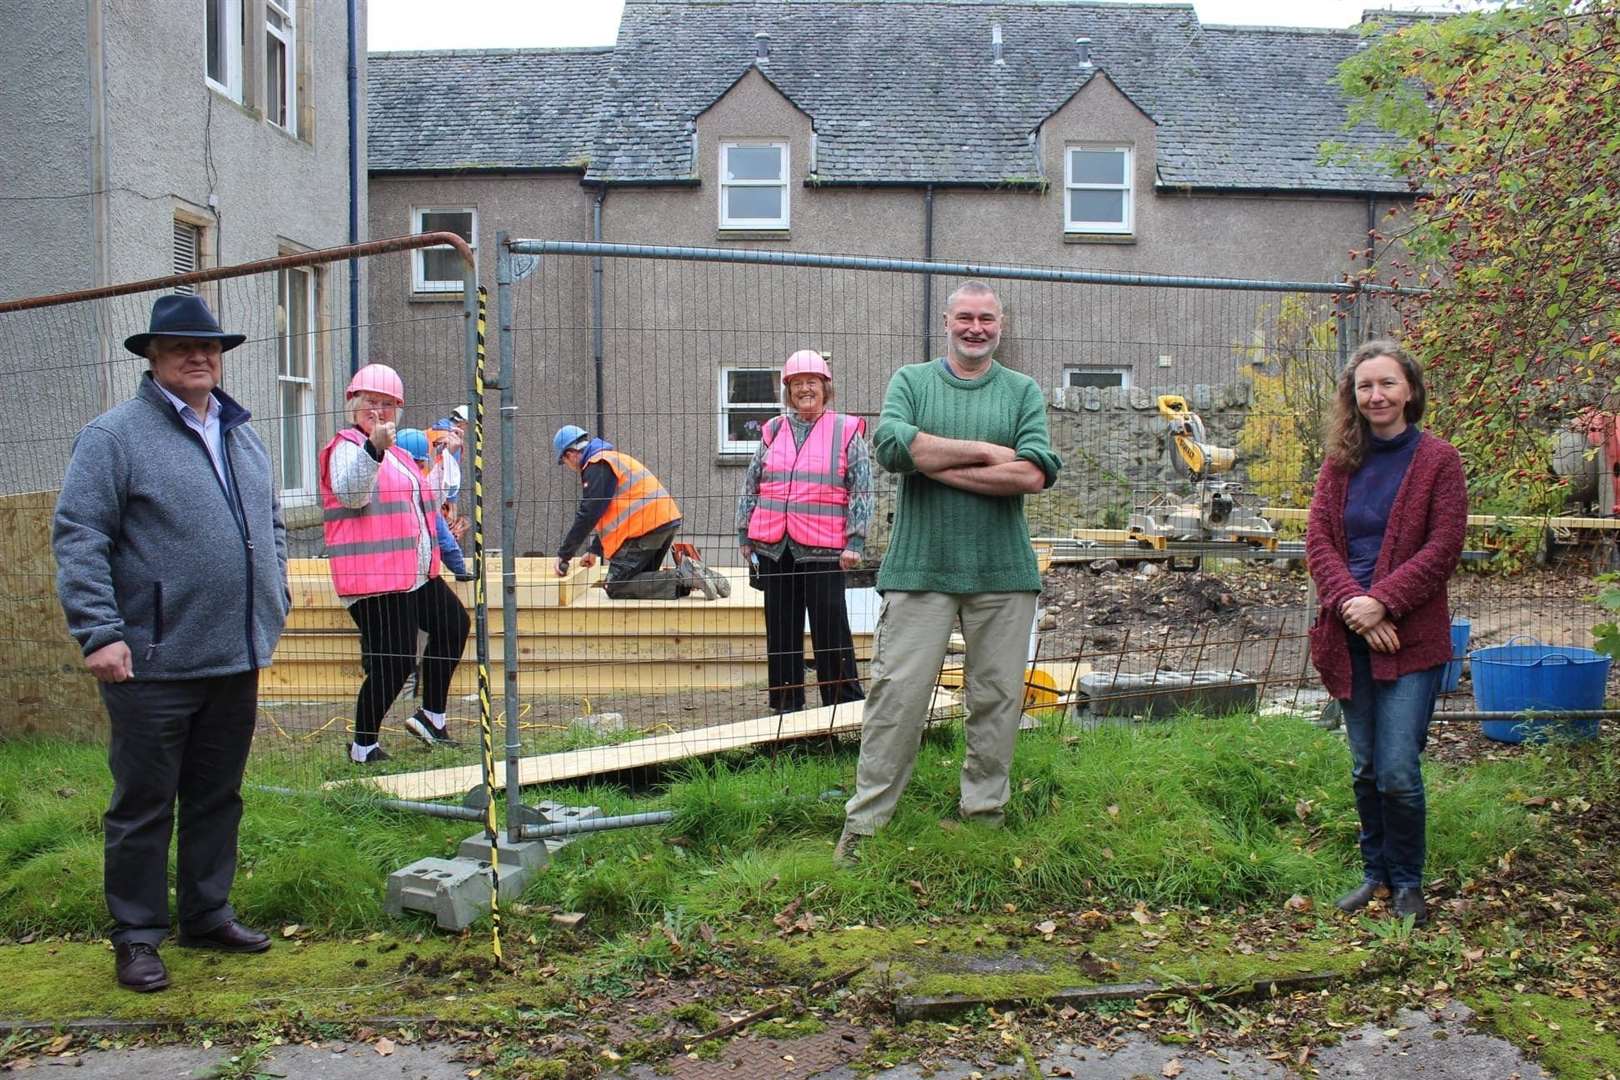 It's all go at the new Kingussie hub, say (from left) Highland councillor Bill Lobban, Carolyn Cornfield, Caberfeidh Horizons chair Patsy Rimell and the two staff members who will, through a brand new job share, serve as community hub managers: Sandy Maxwell and Helen Armour. (Photo: David Macleod)